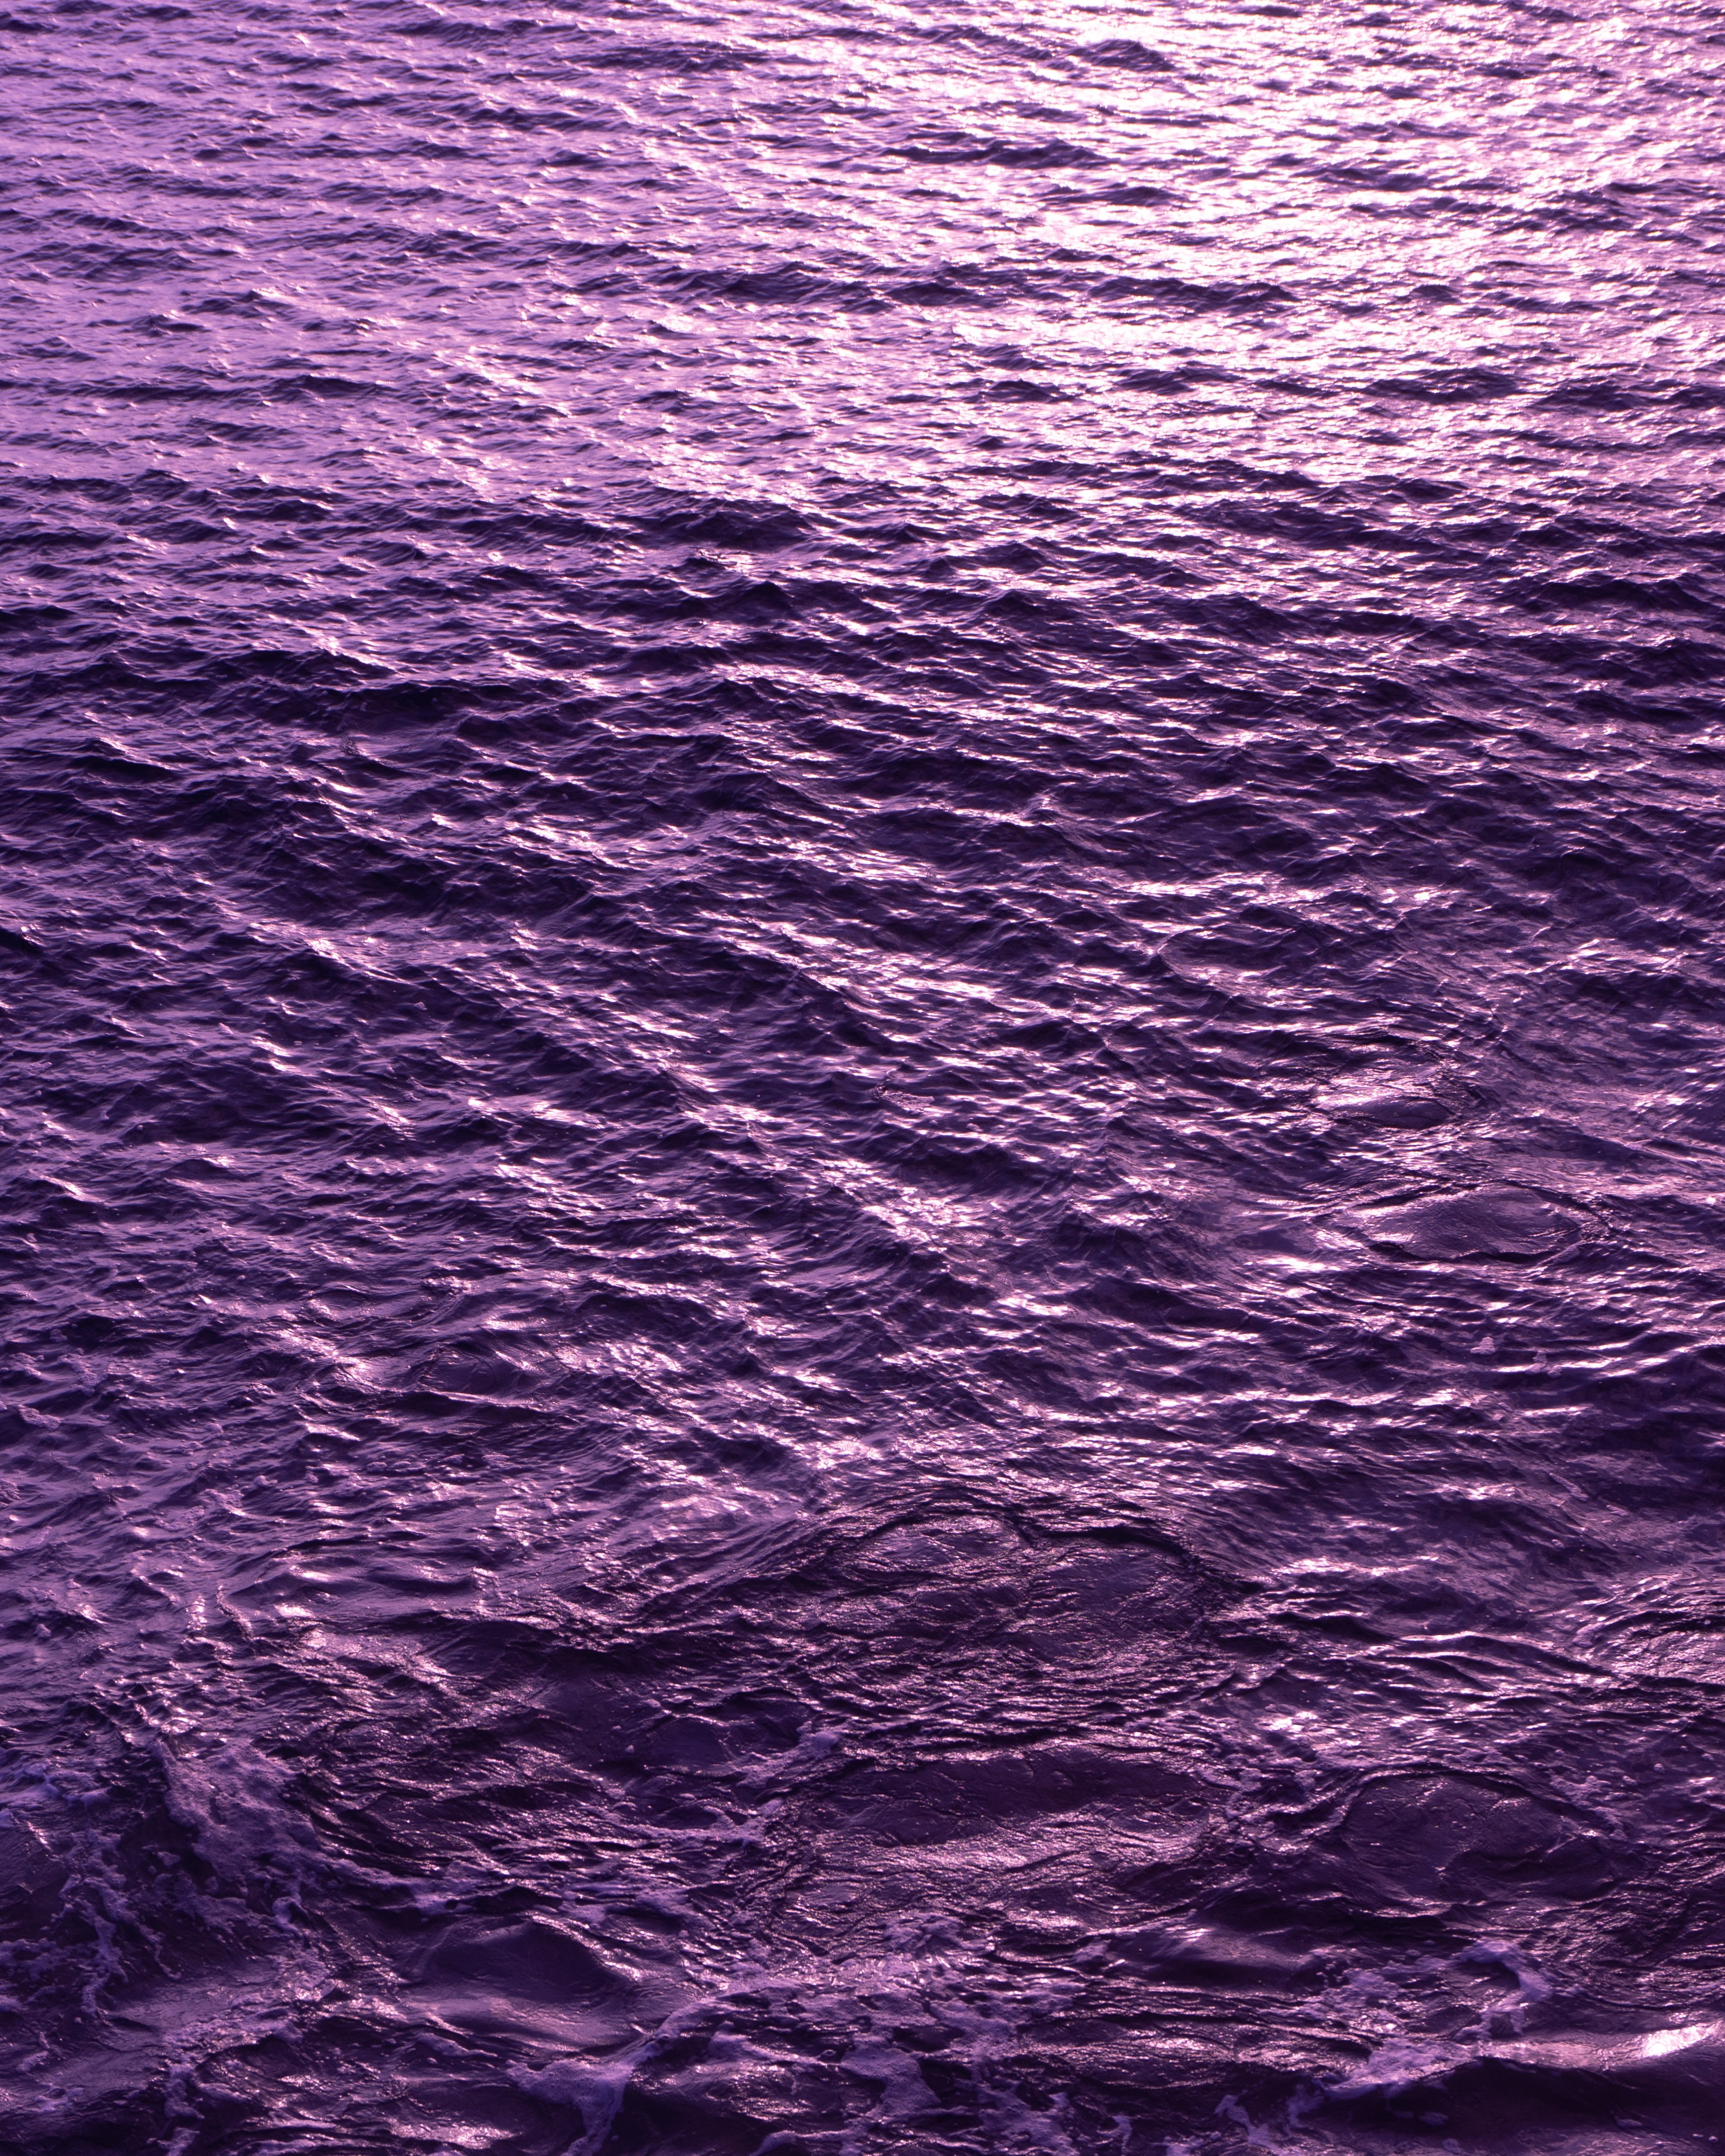 purple, surface, water, nature, waves, violet, ripples, ripple